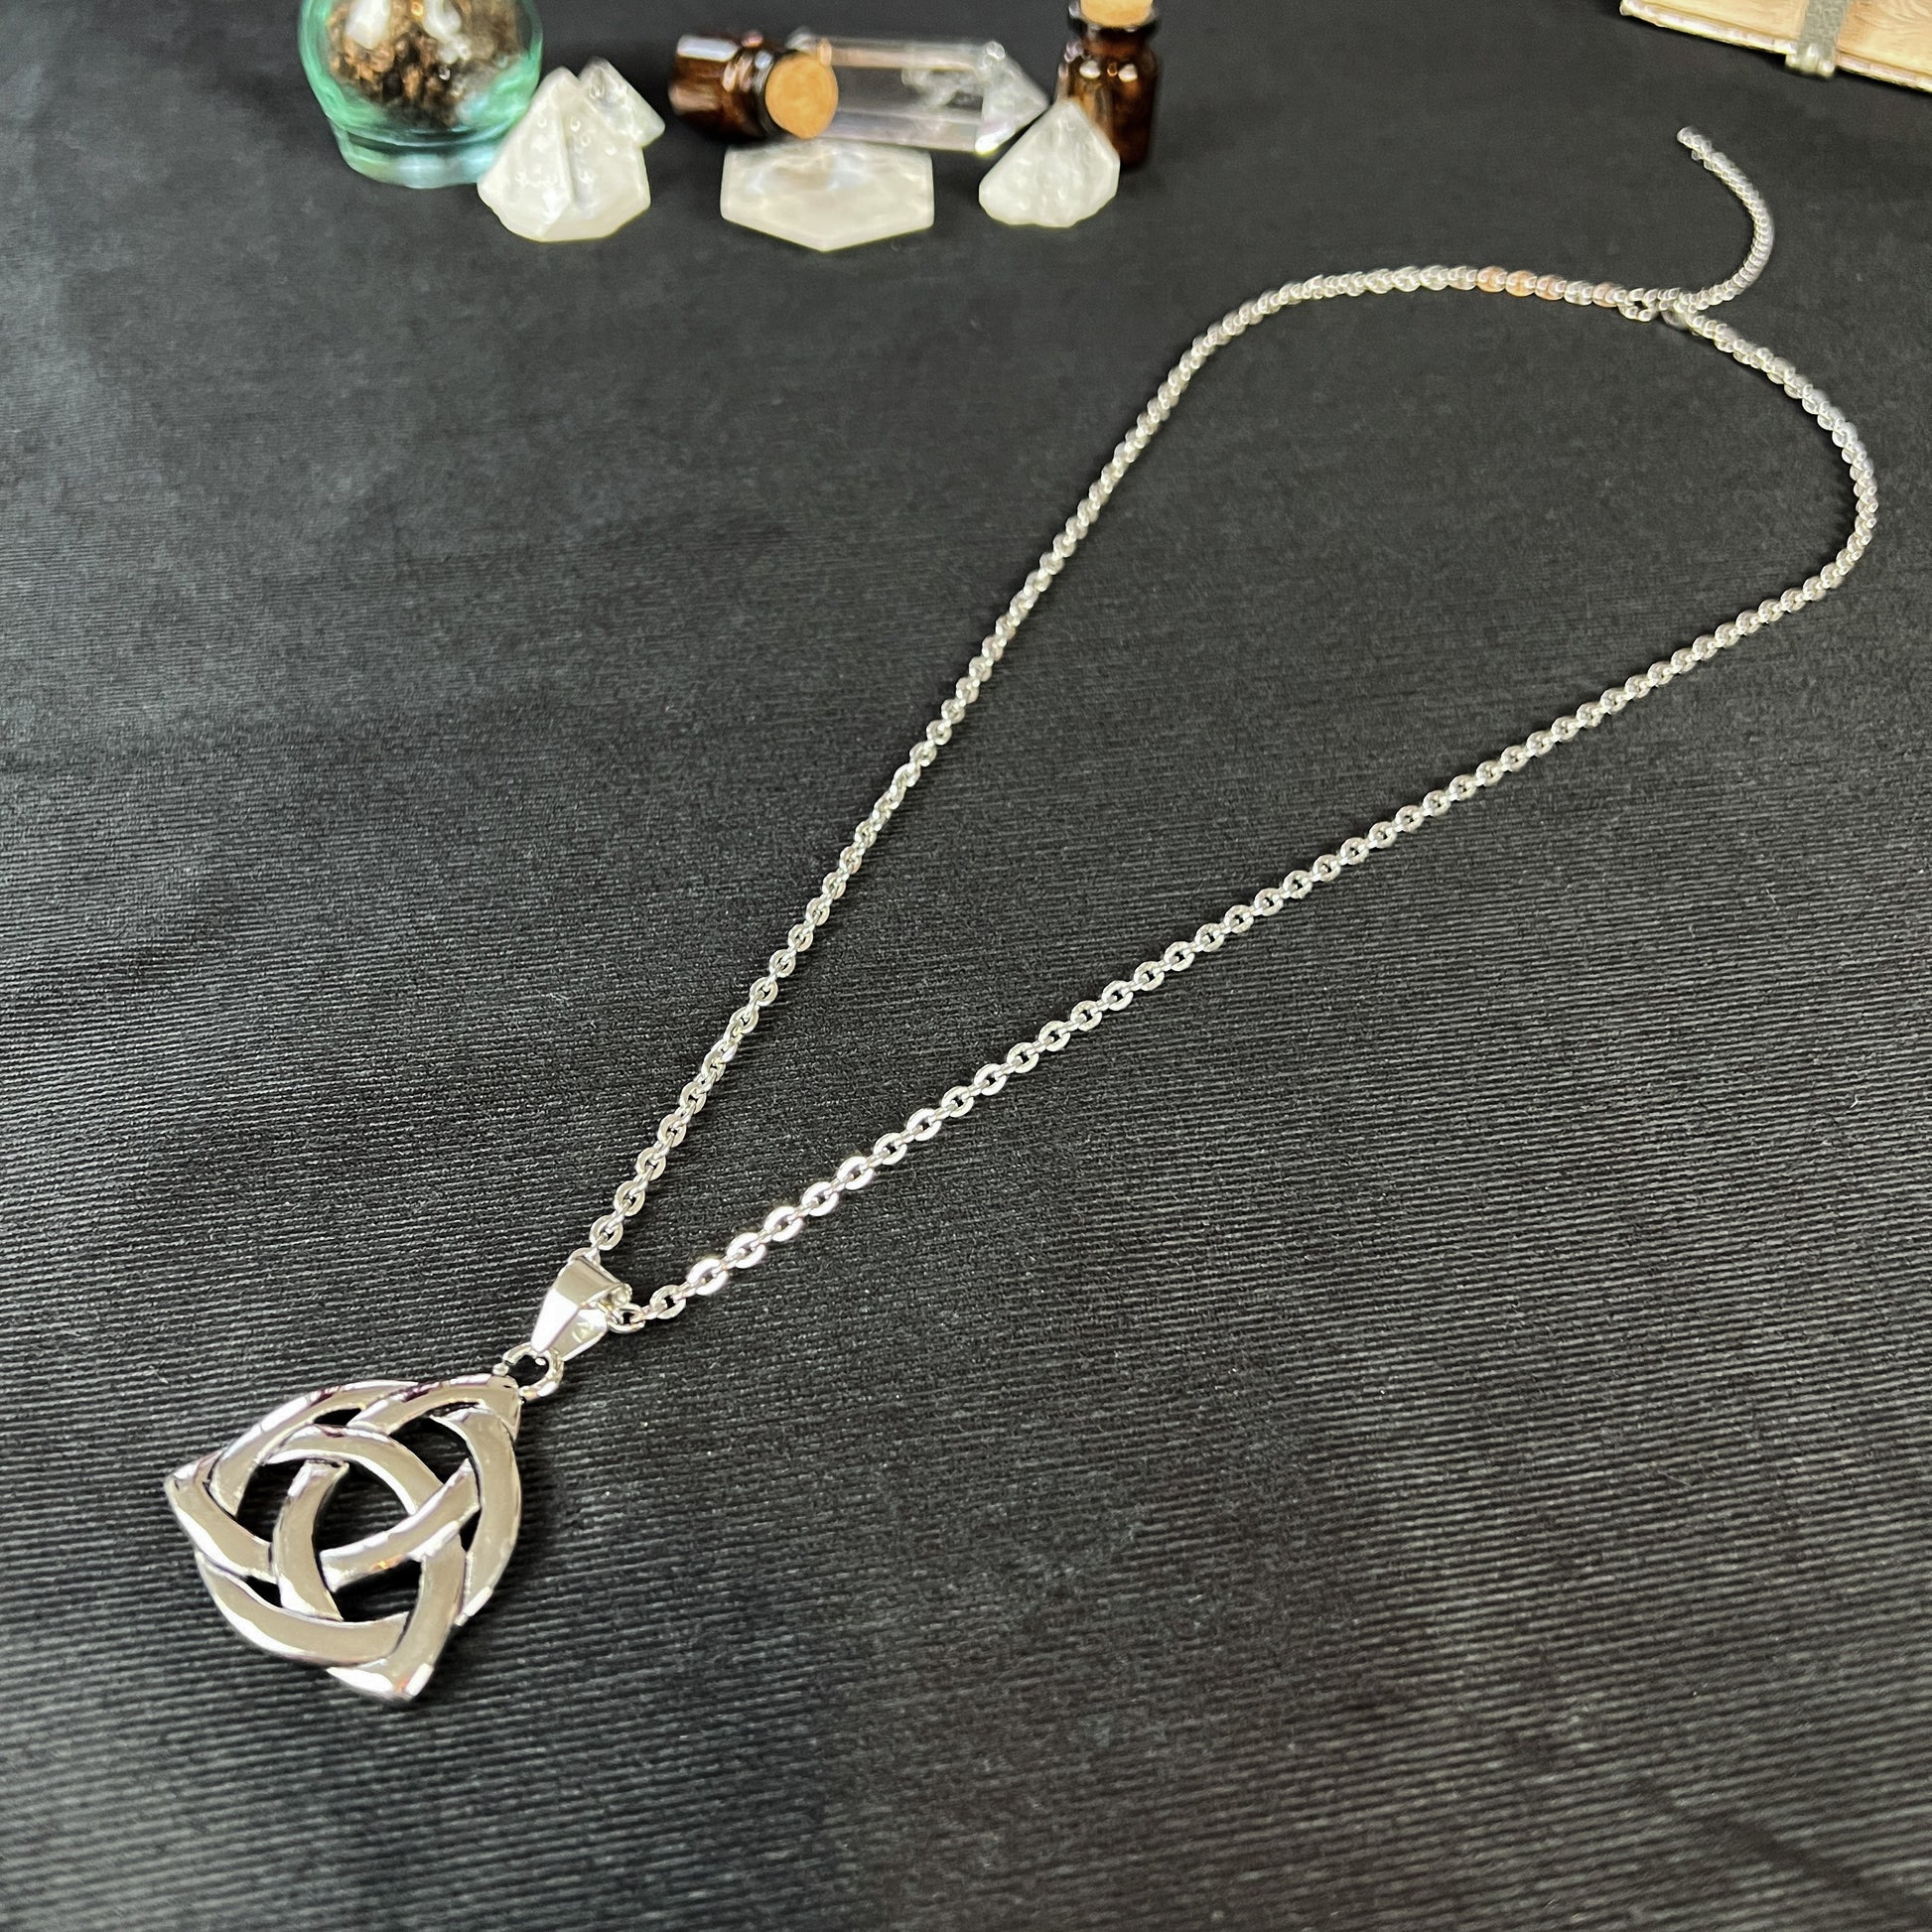 Triquetra necklace made of stainless steel pagan celtic knot necklace wiccan witch spiritual occult necklace